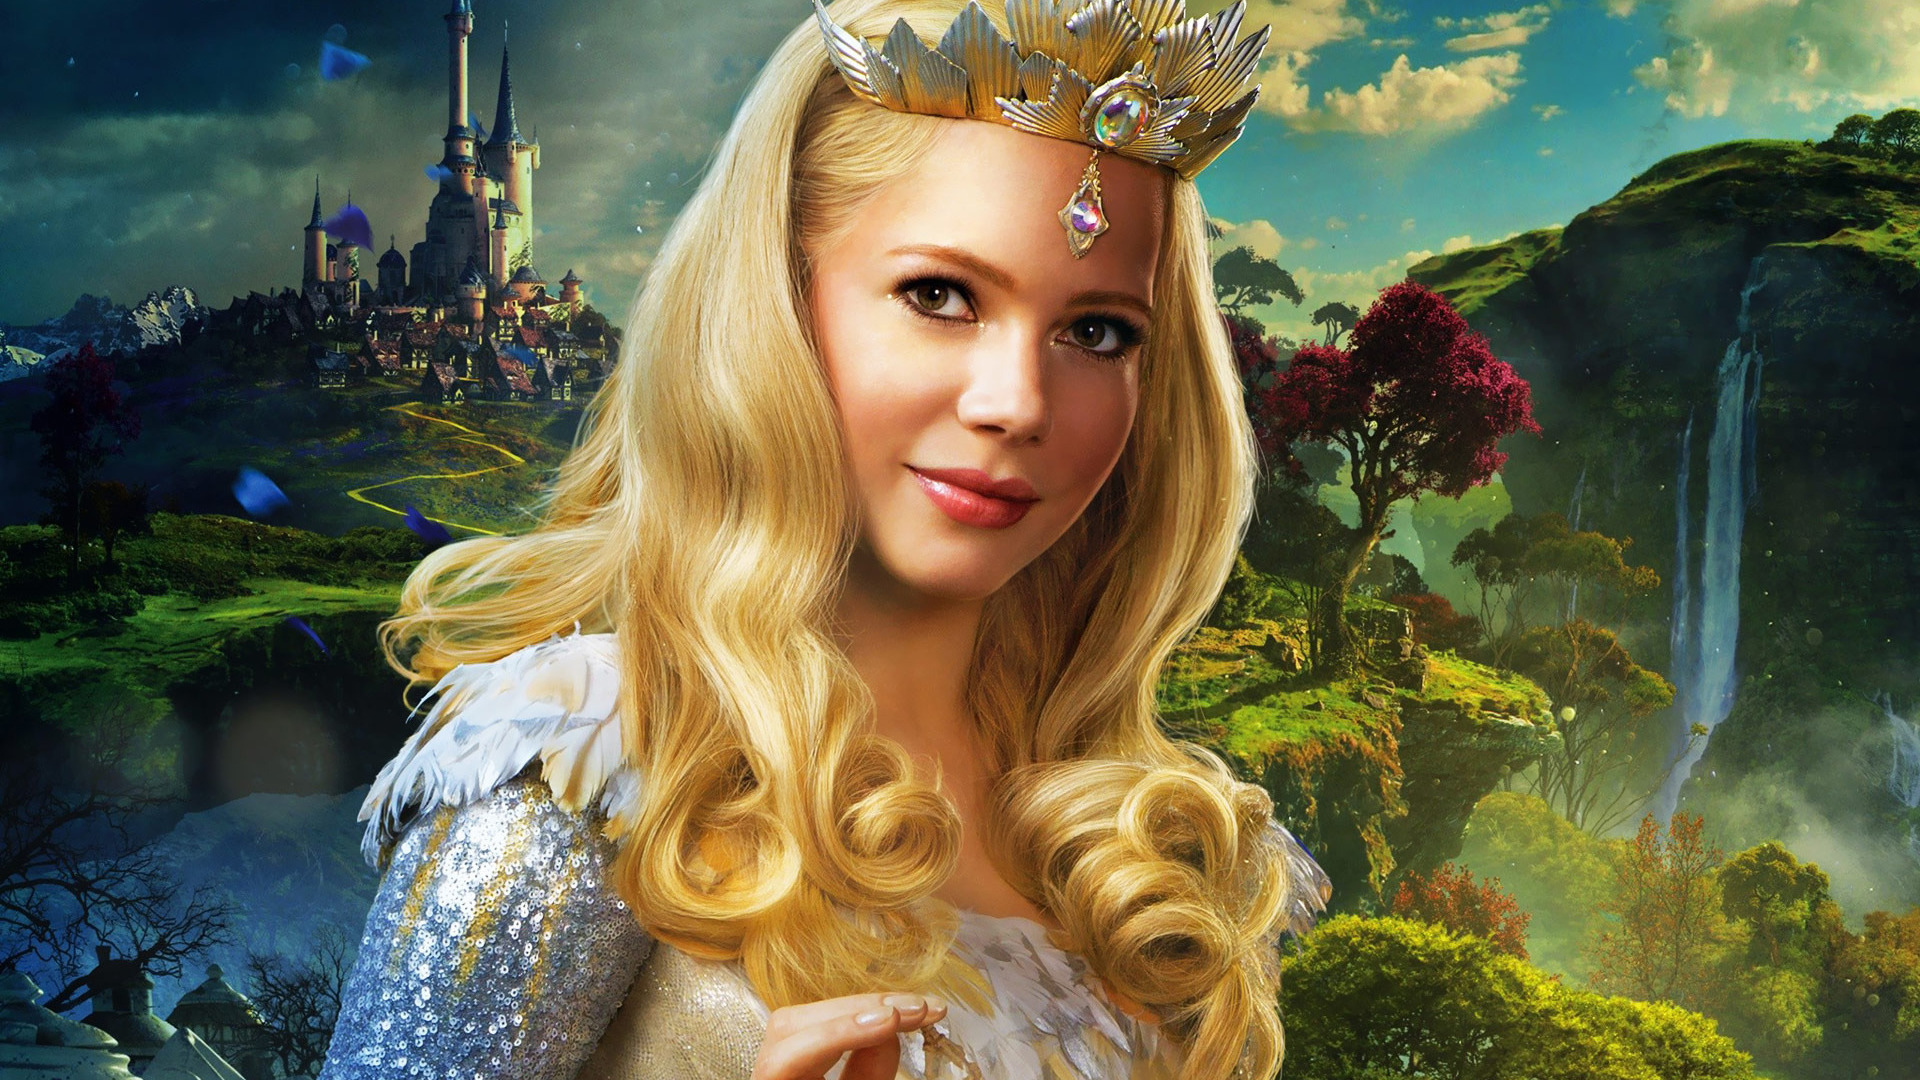 Oz the Great and Powerful Art